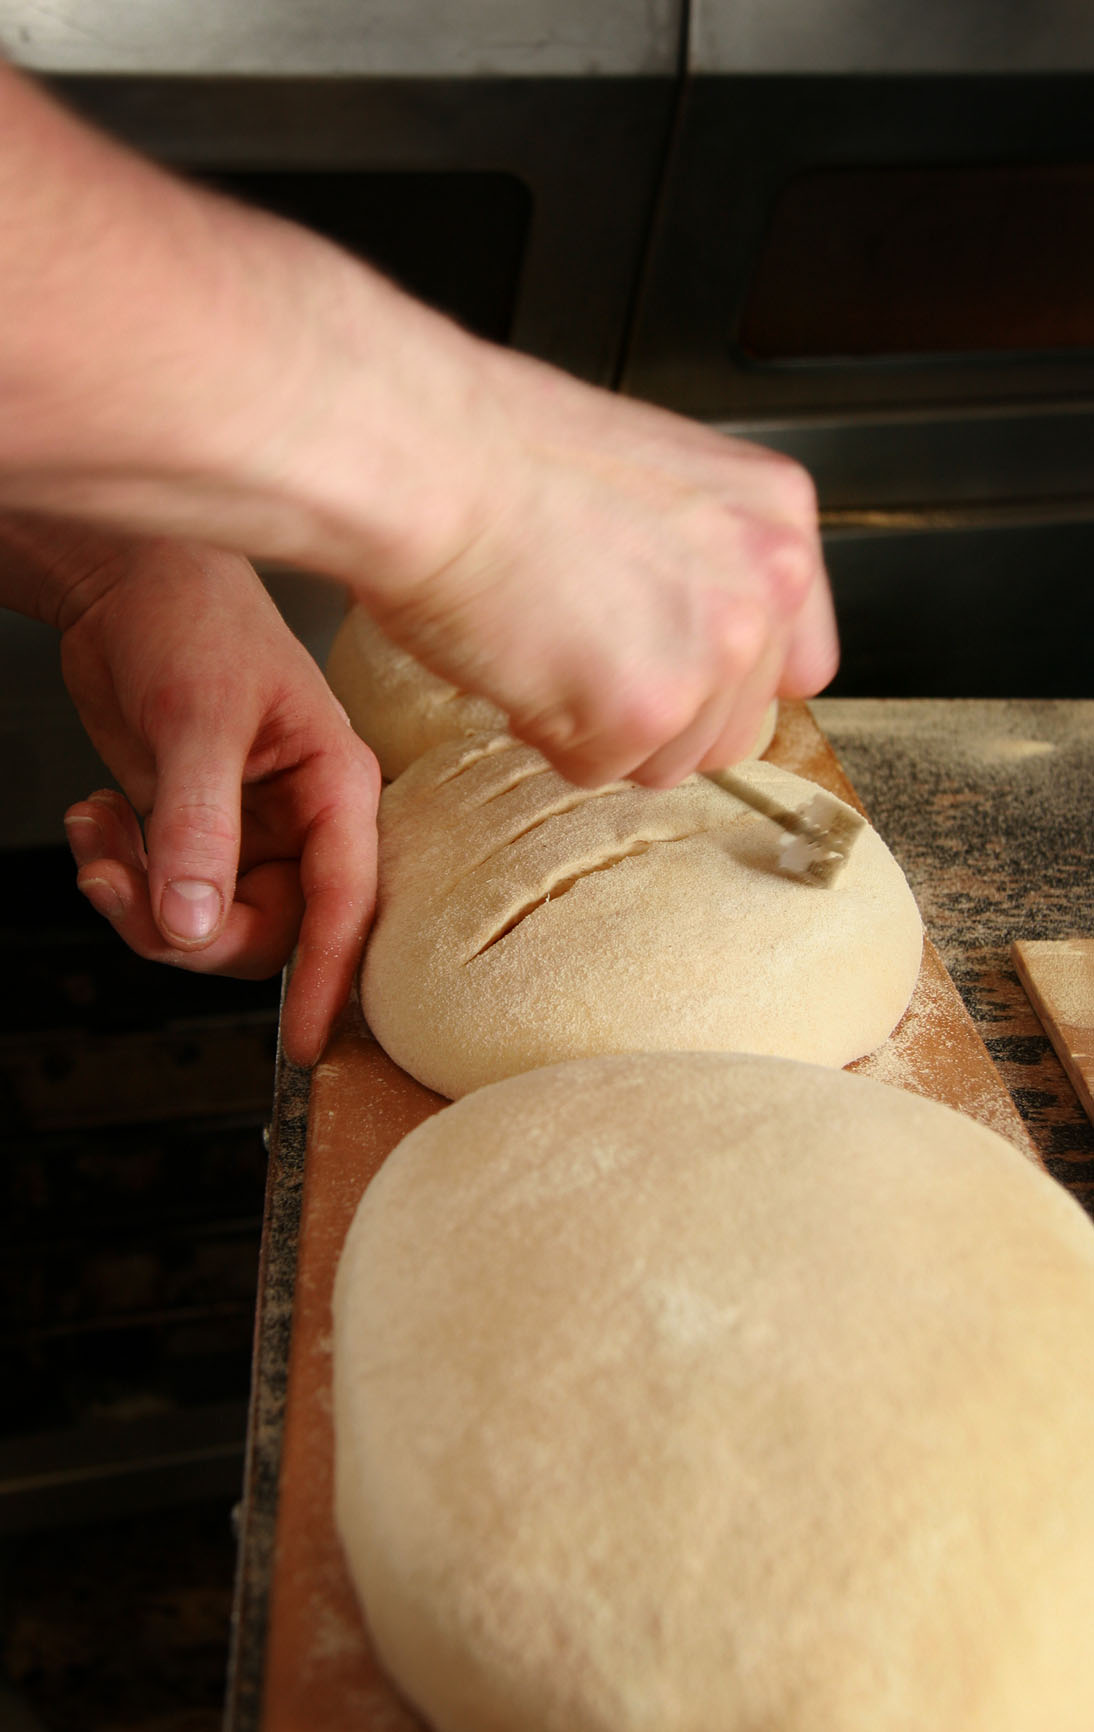 Bread being slashed